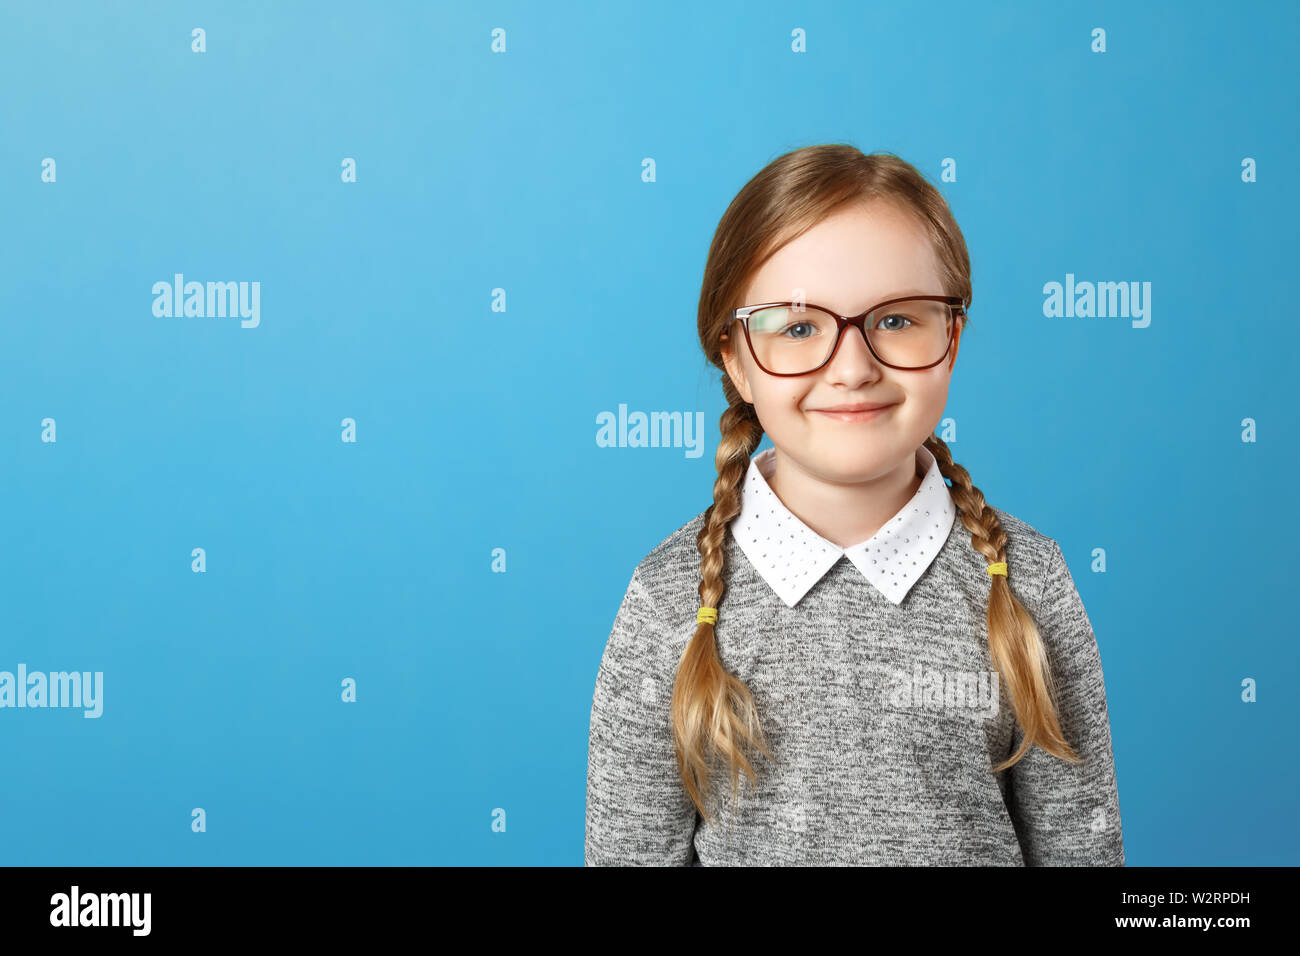 Portrait of a charming little girl schoolgirl with glasses. Cute child in a gray sweater on a blue background. Copy space. Stock Photo